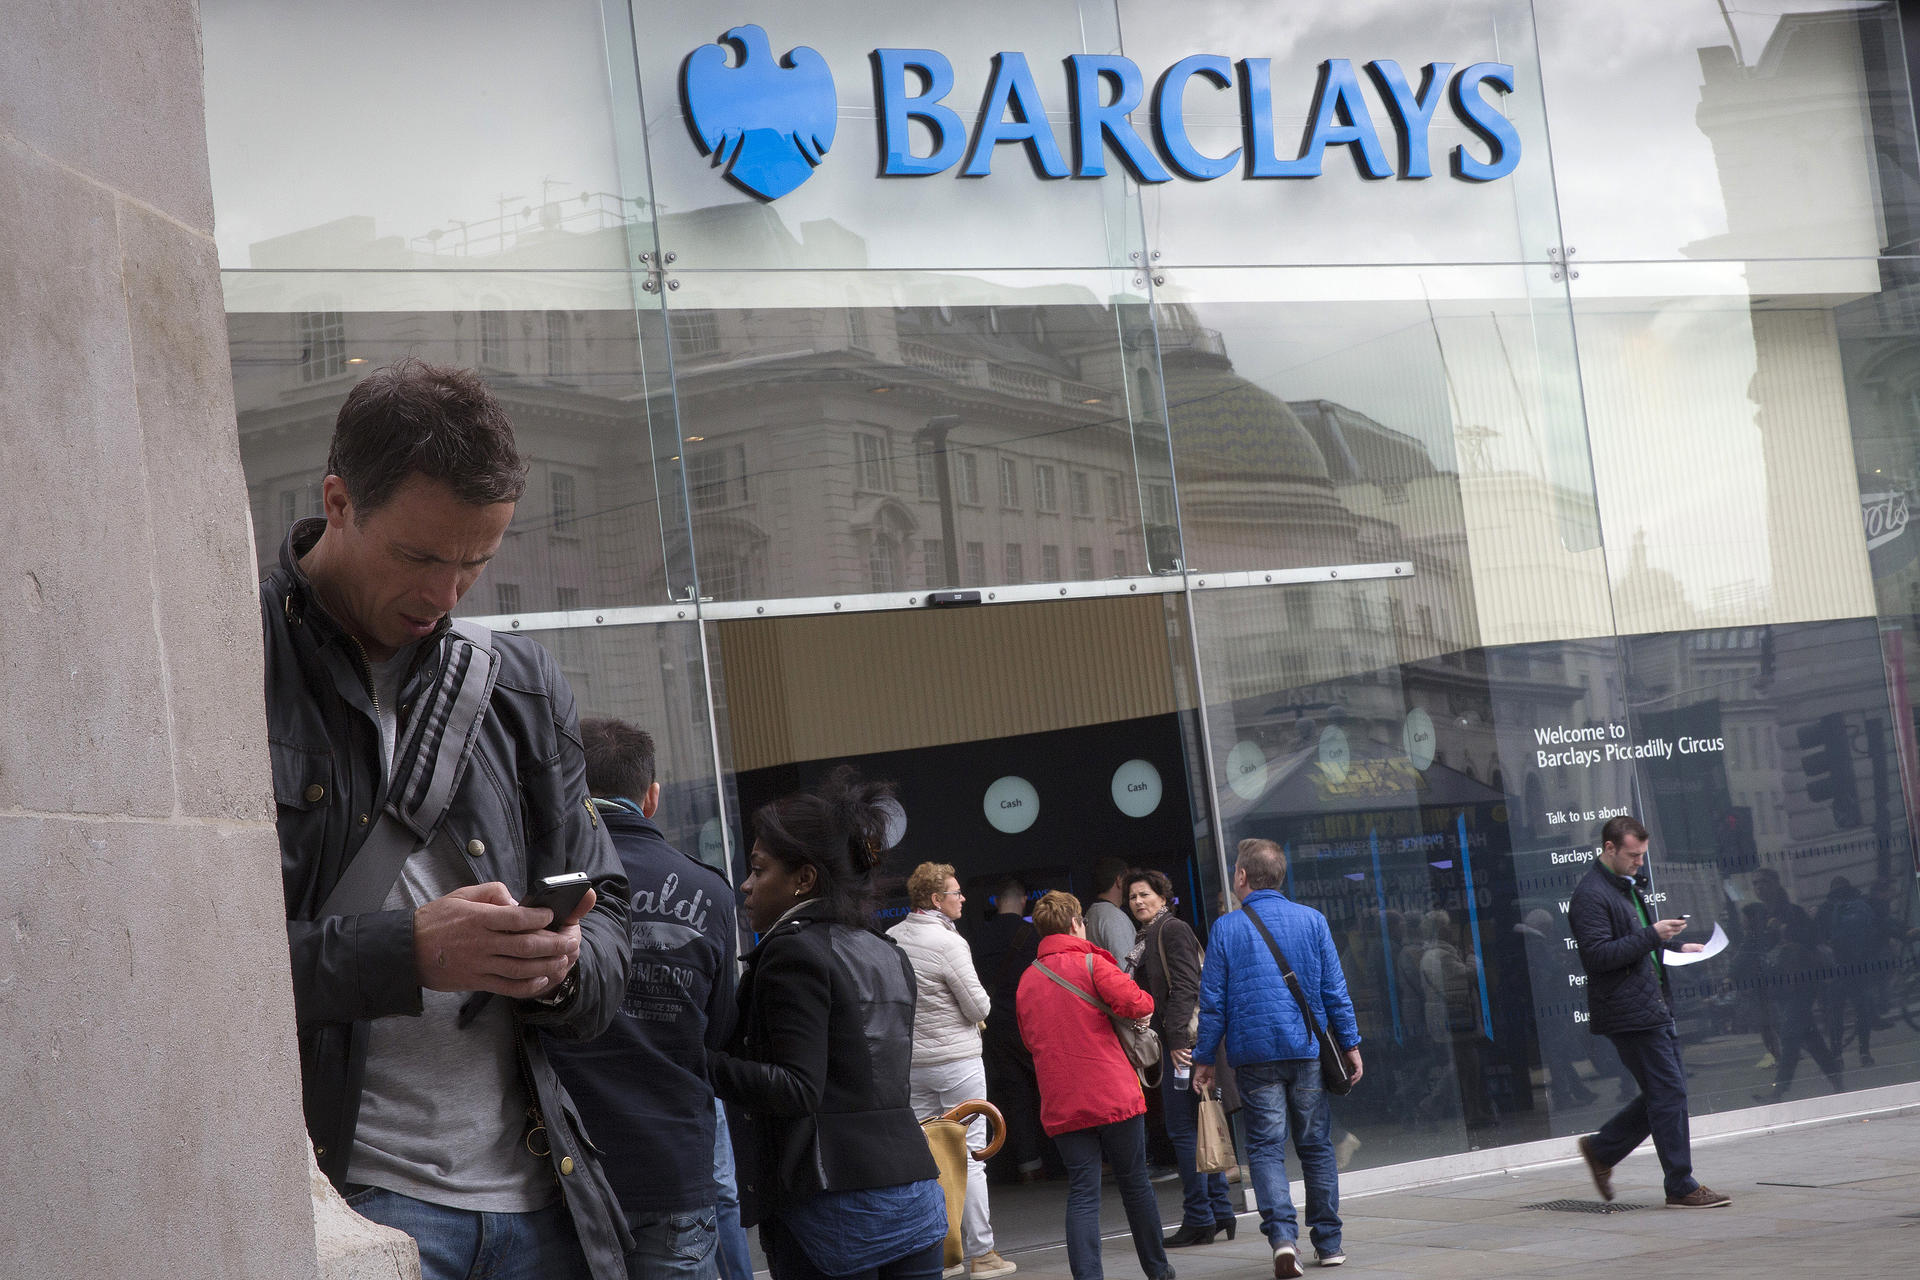 Barclays is targeting growth in key areas of strength as it cuts jobs after the departure of a number of senior staff. Photo: Bloomberg